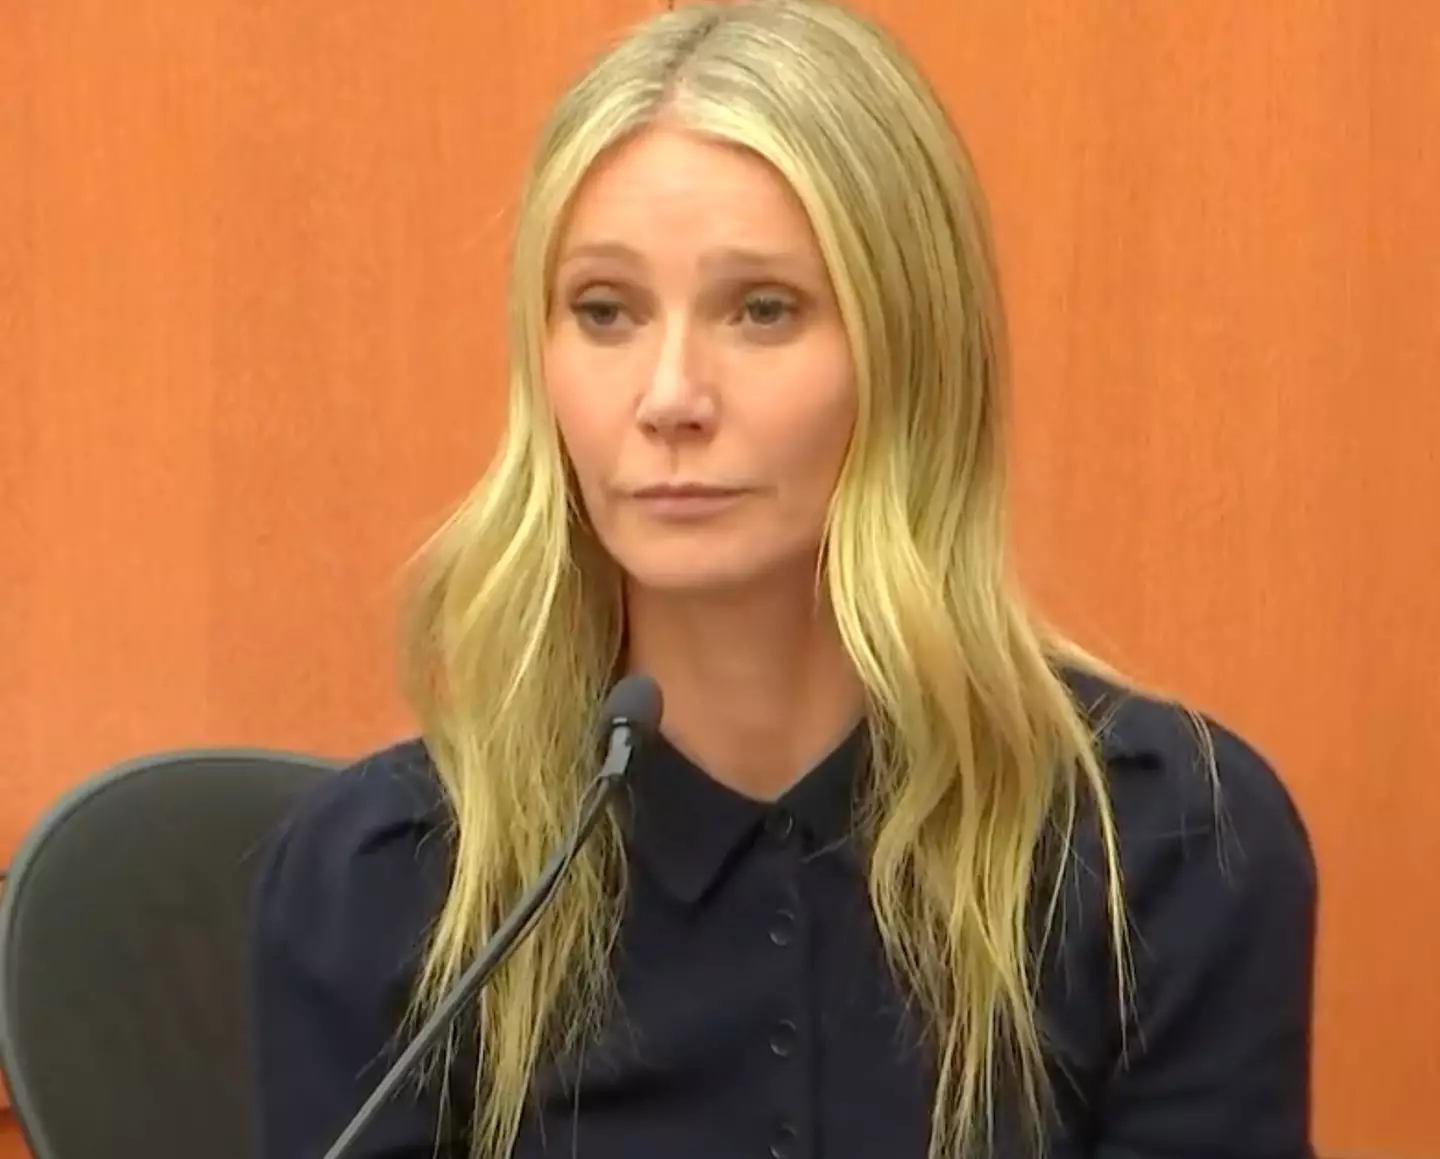 Gwyneth Paltrow is being roasted over her countersuit against Terry Sanderson.